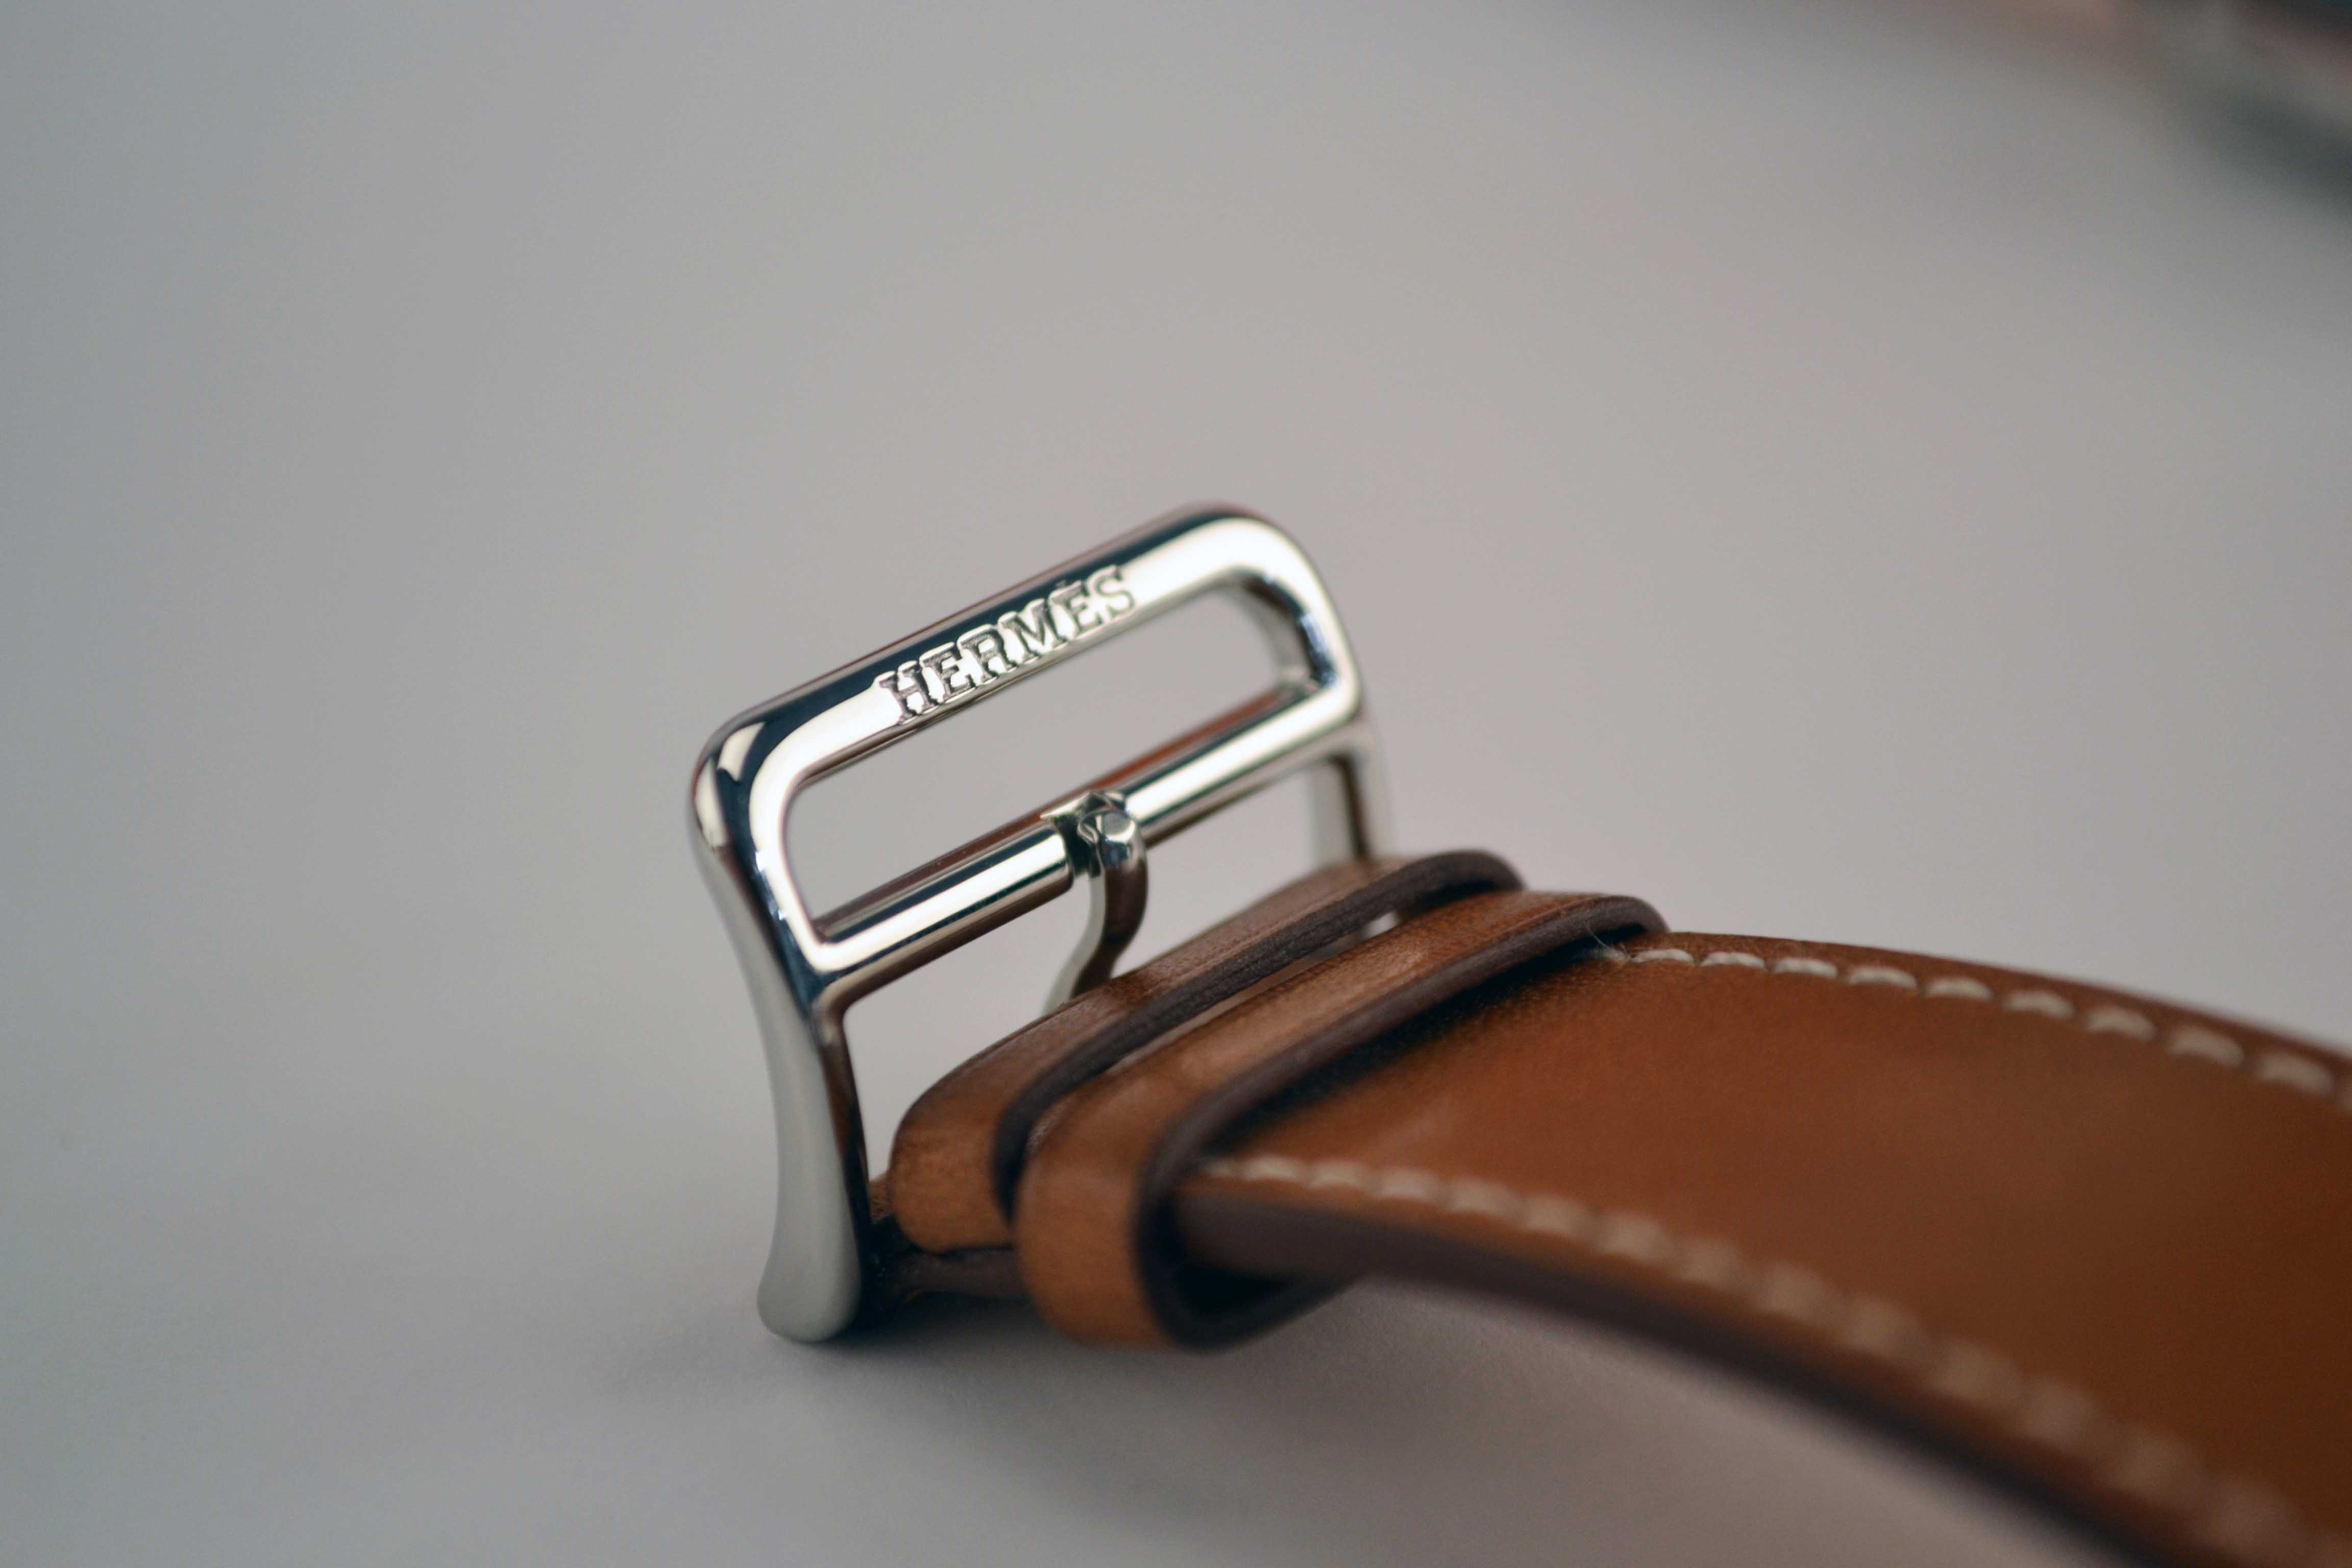 The Hermès Apple Watch - Haute Time Review